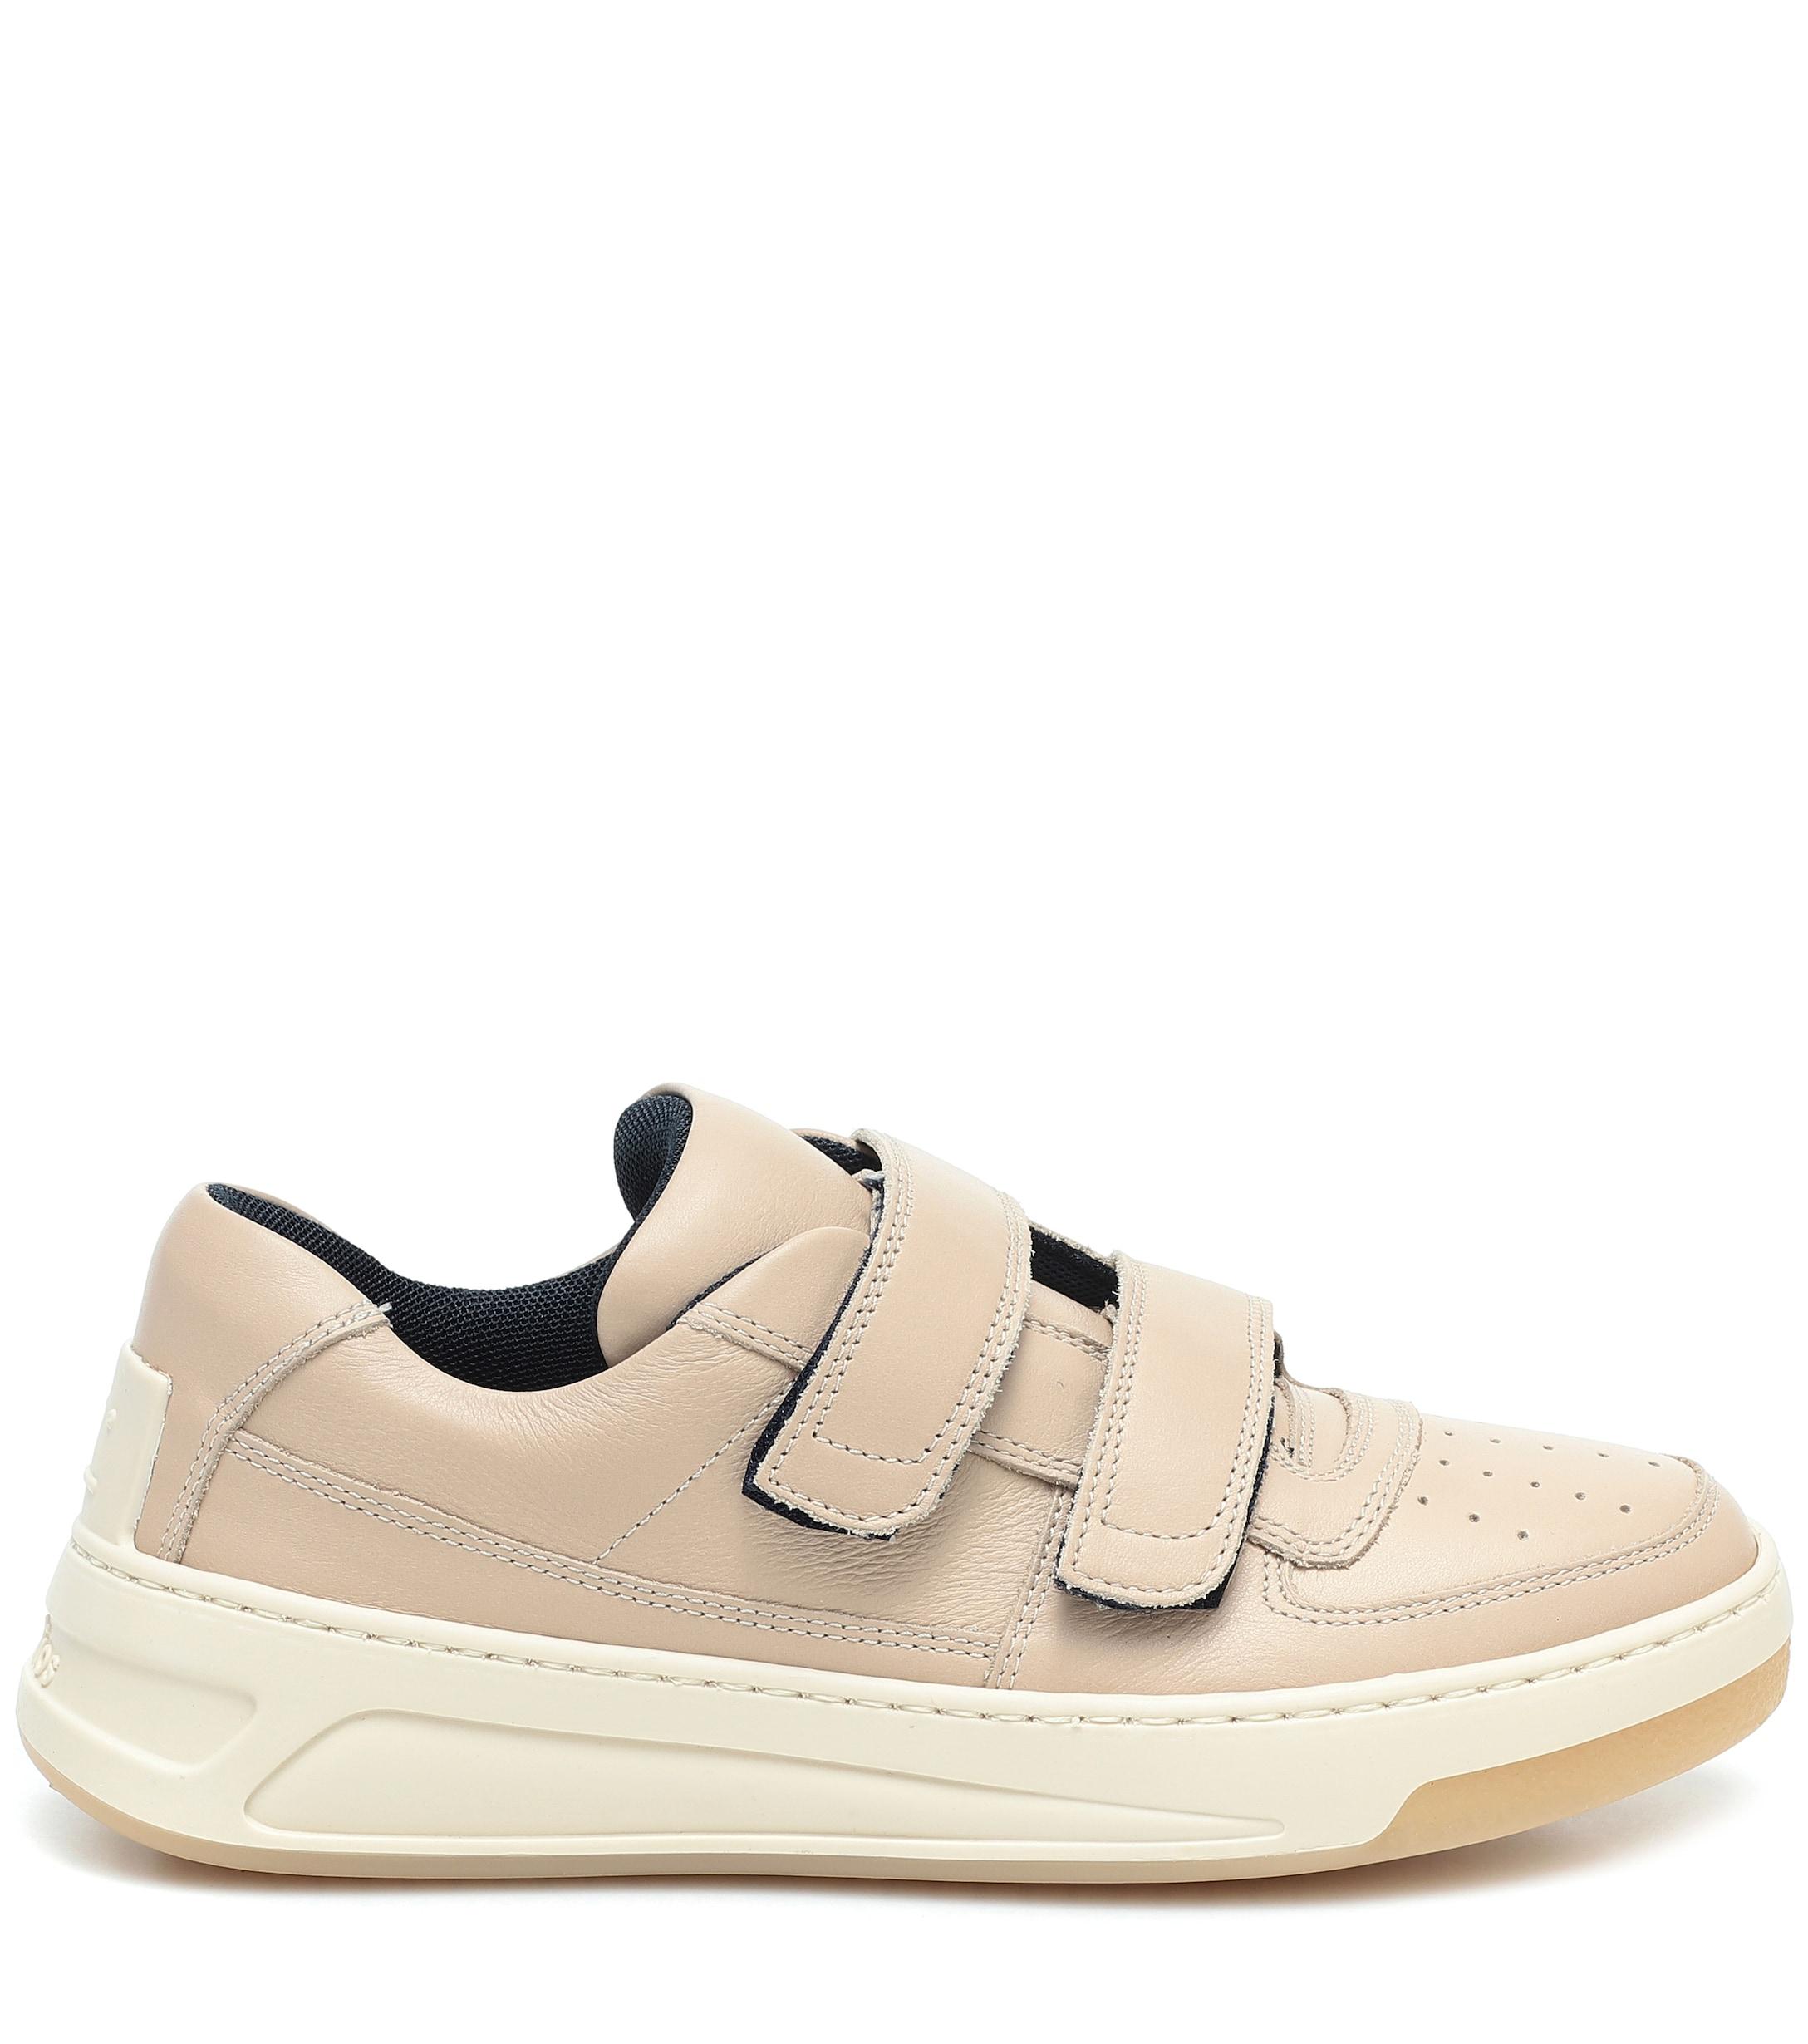 Acne Studios Steffey Sand Leather Sneakers in Natural | Lyst